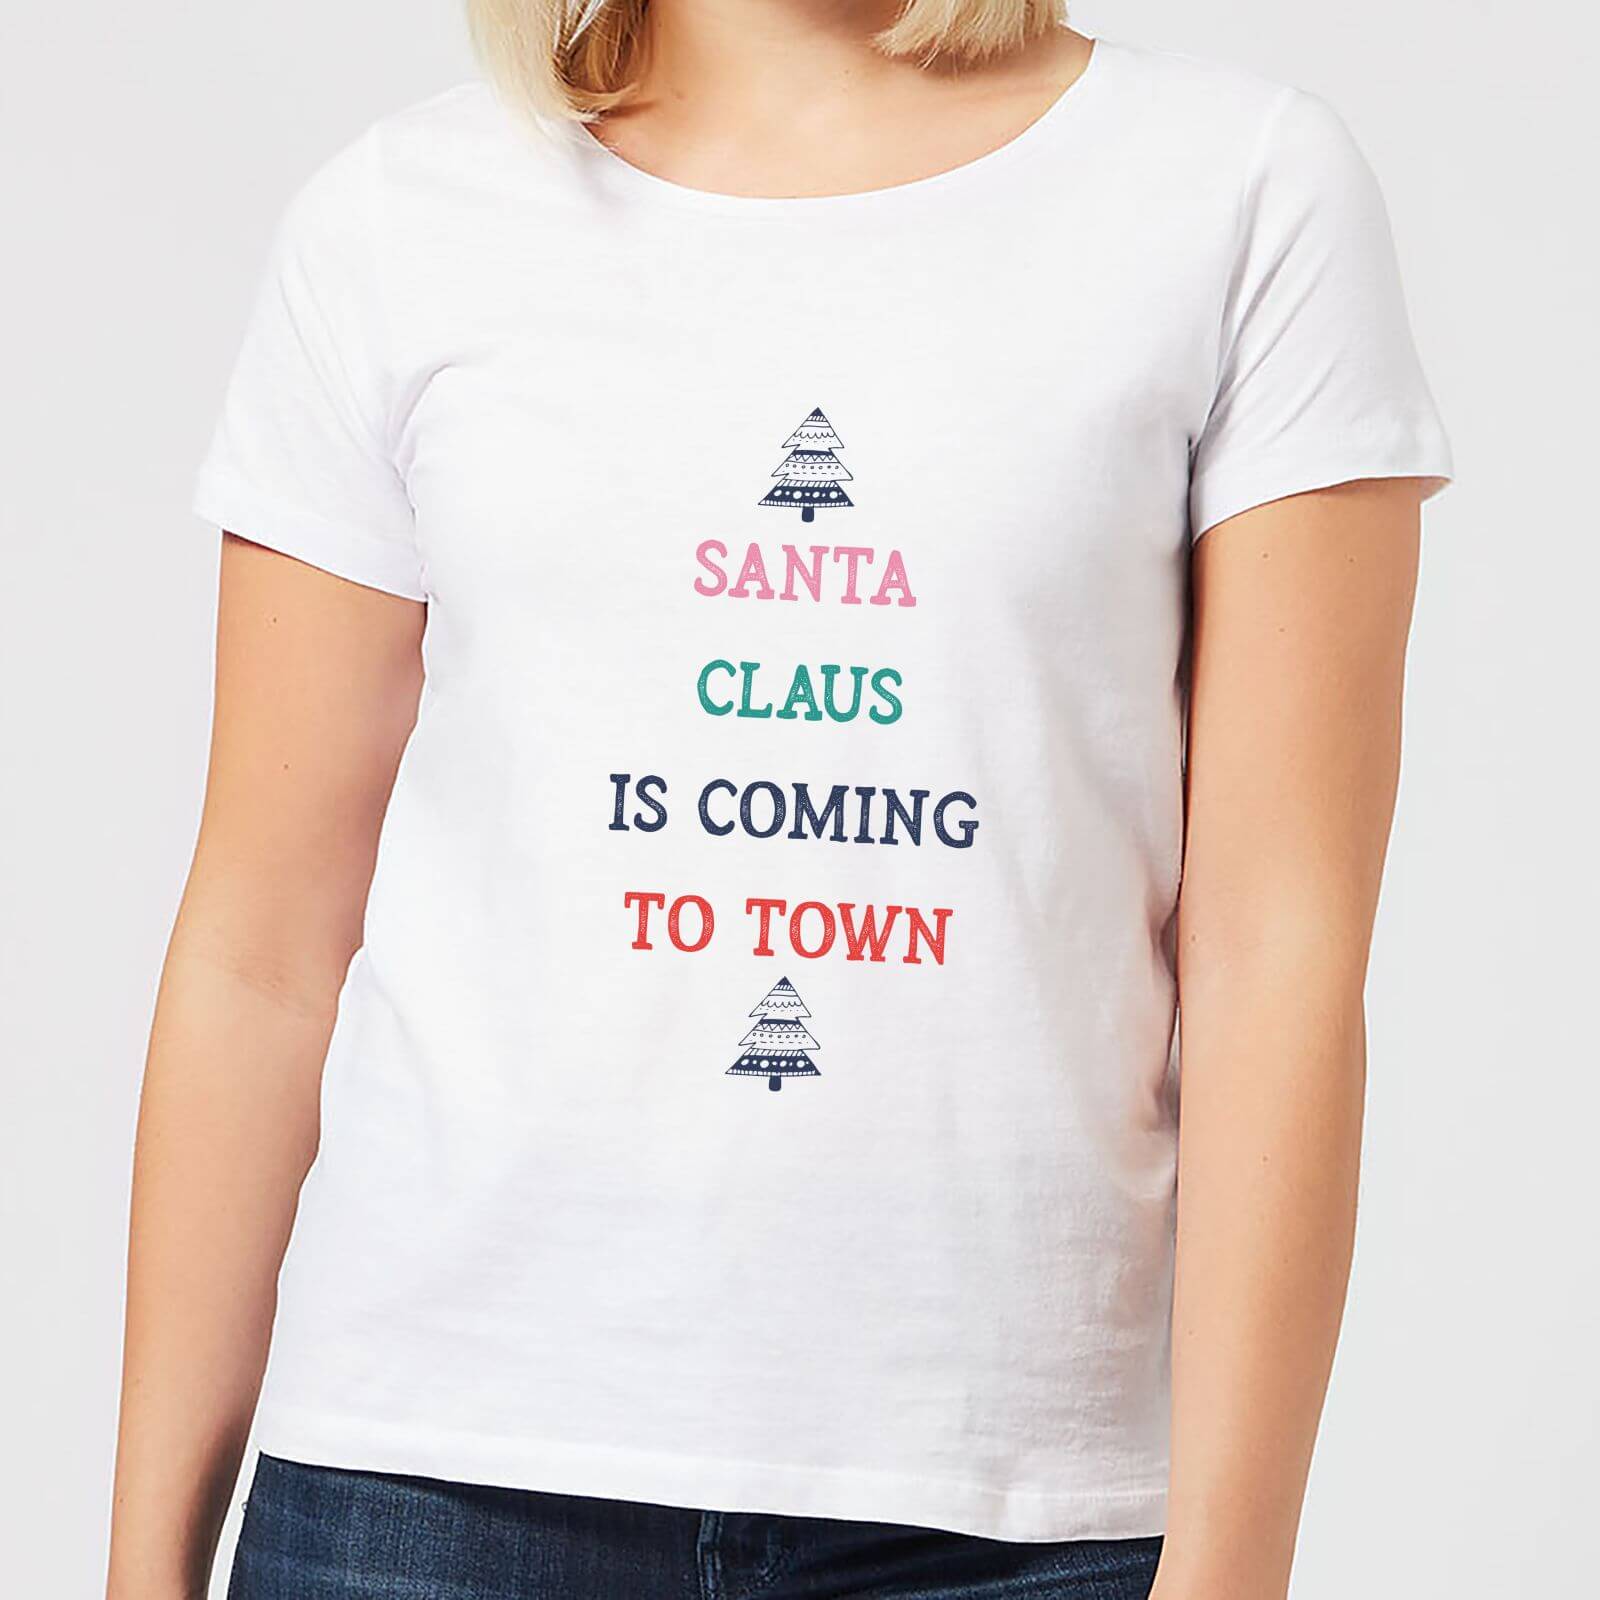 Santa Claus Is Coming To Town Women's Christmas T-Shirt - White - S - White